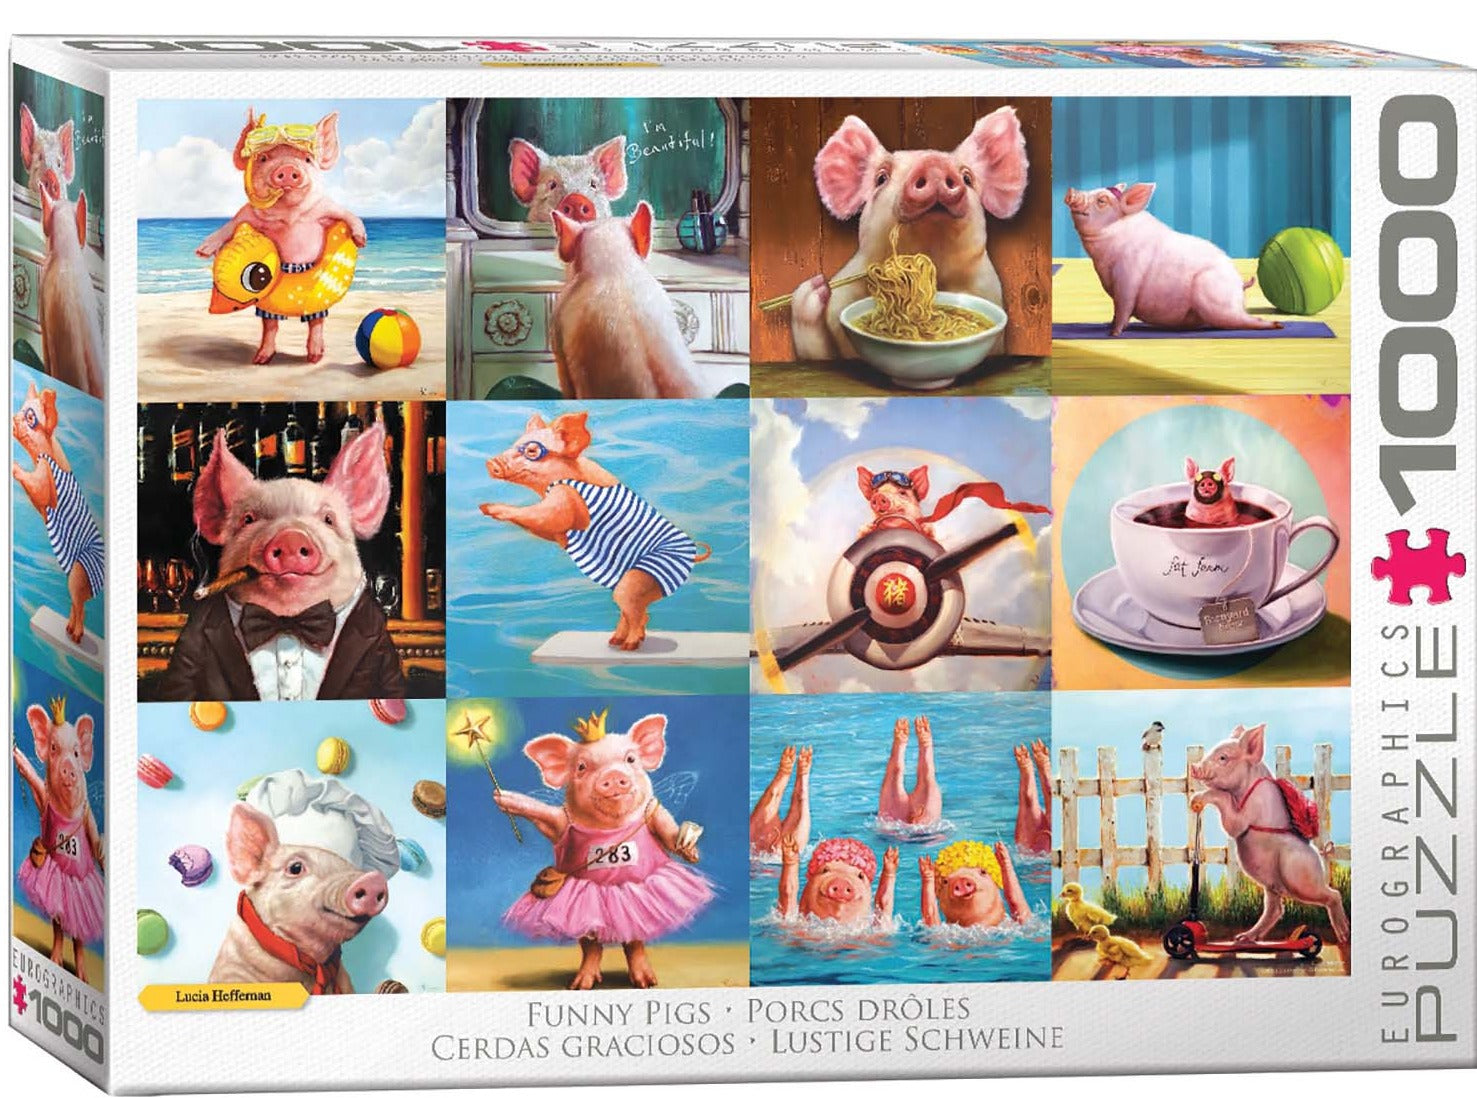 Funny Pigs 1000pc Puzzle